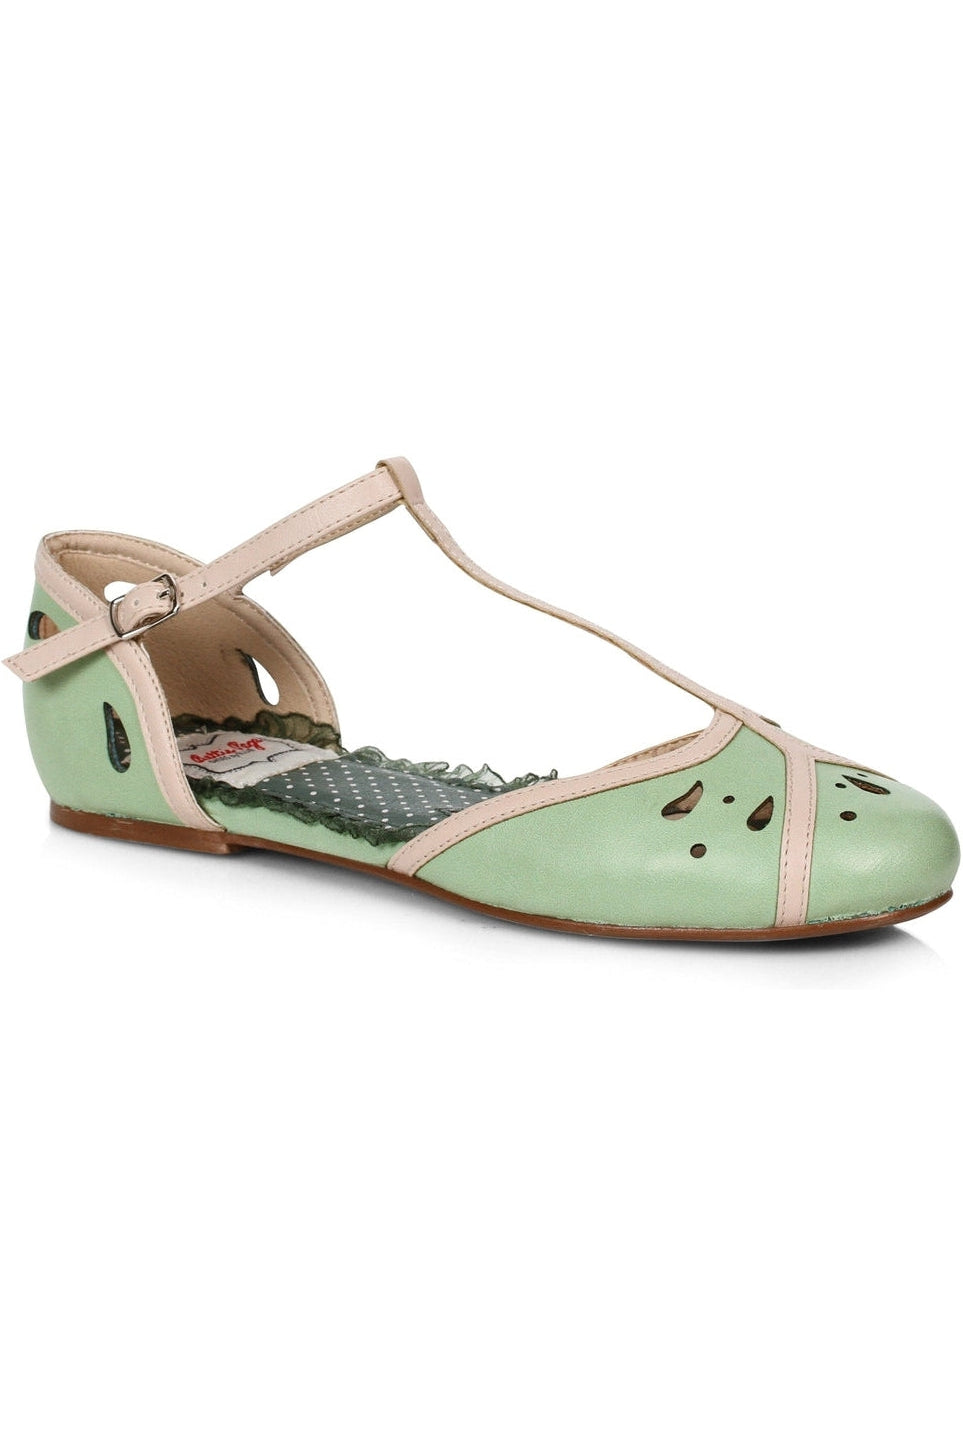 Bettie Page Katie Flat | Green Faux Leather-Flats-Bettie Page by Ellie-SEXYSHOES.COM